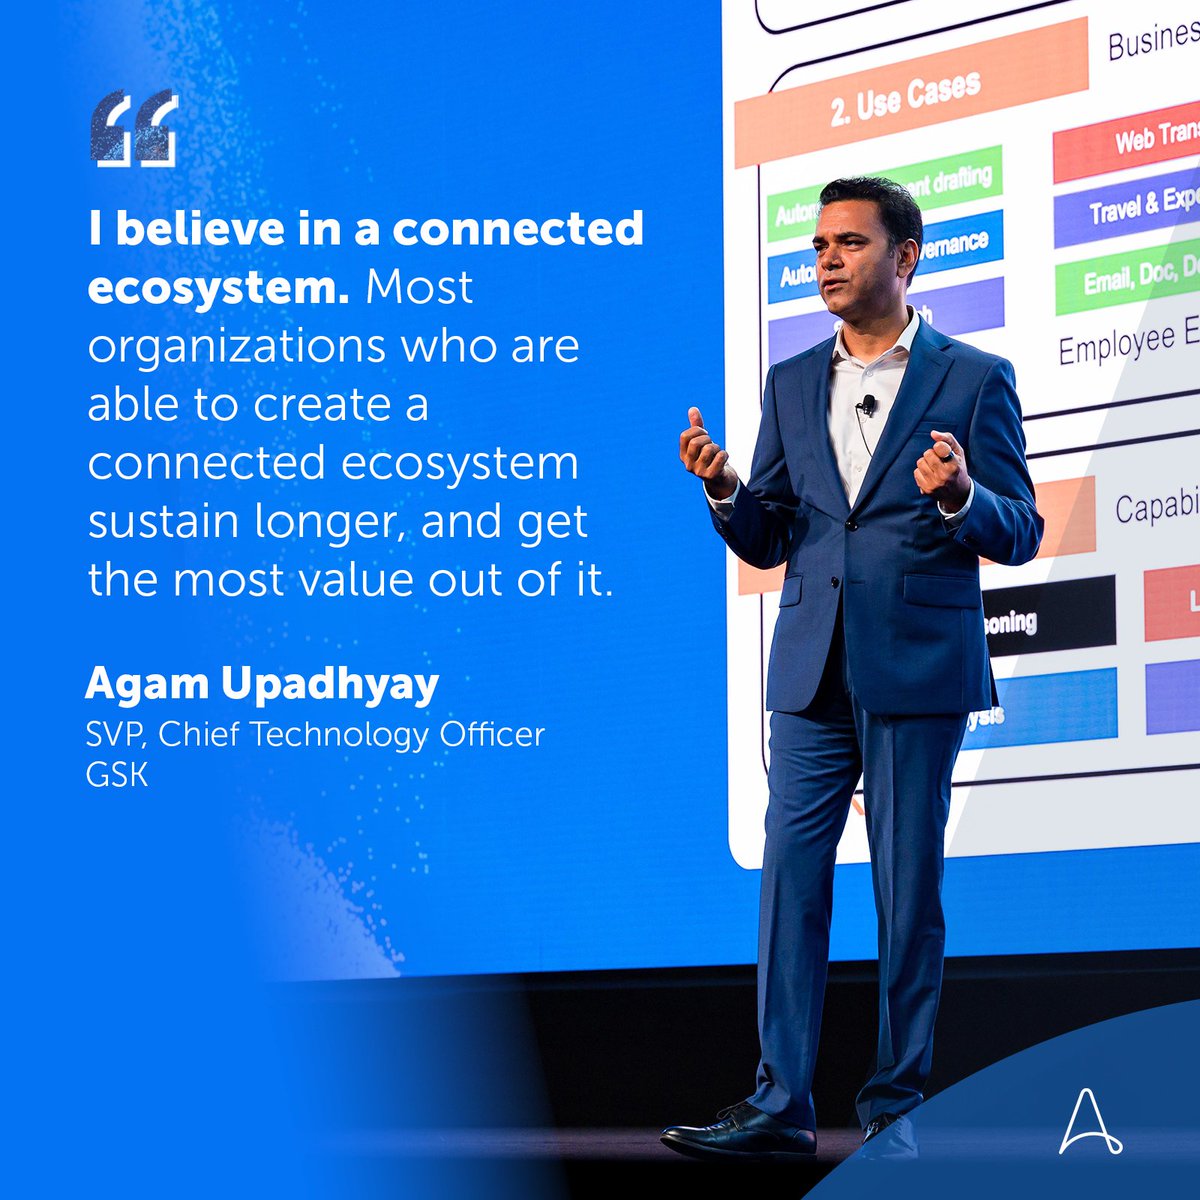 🚀 Missed the amazing keynote session at #Imagine2023 with Agam Upadhyay, Chief Technology Officer at GSK? No worries, we've got you covered! 🎥 Watch the recording on demand: spr.ly/6017uXCkd #Automation #AI #DigitalTransformation